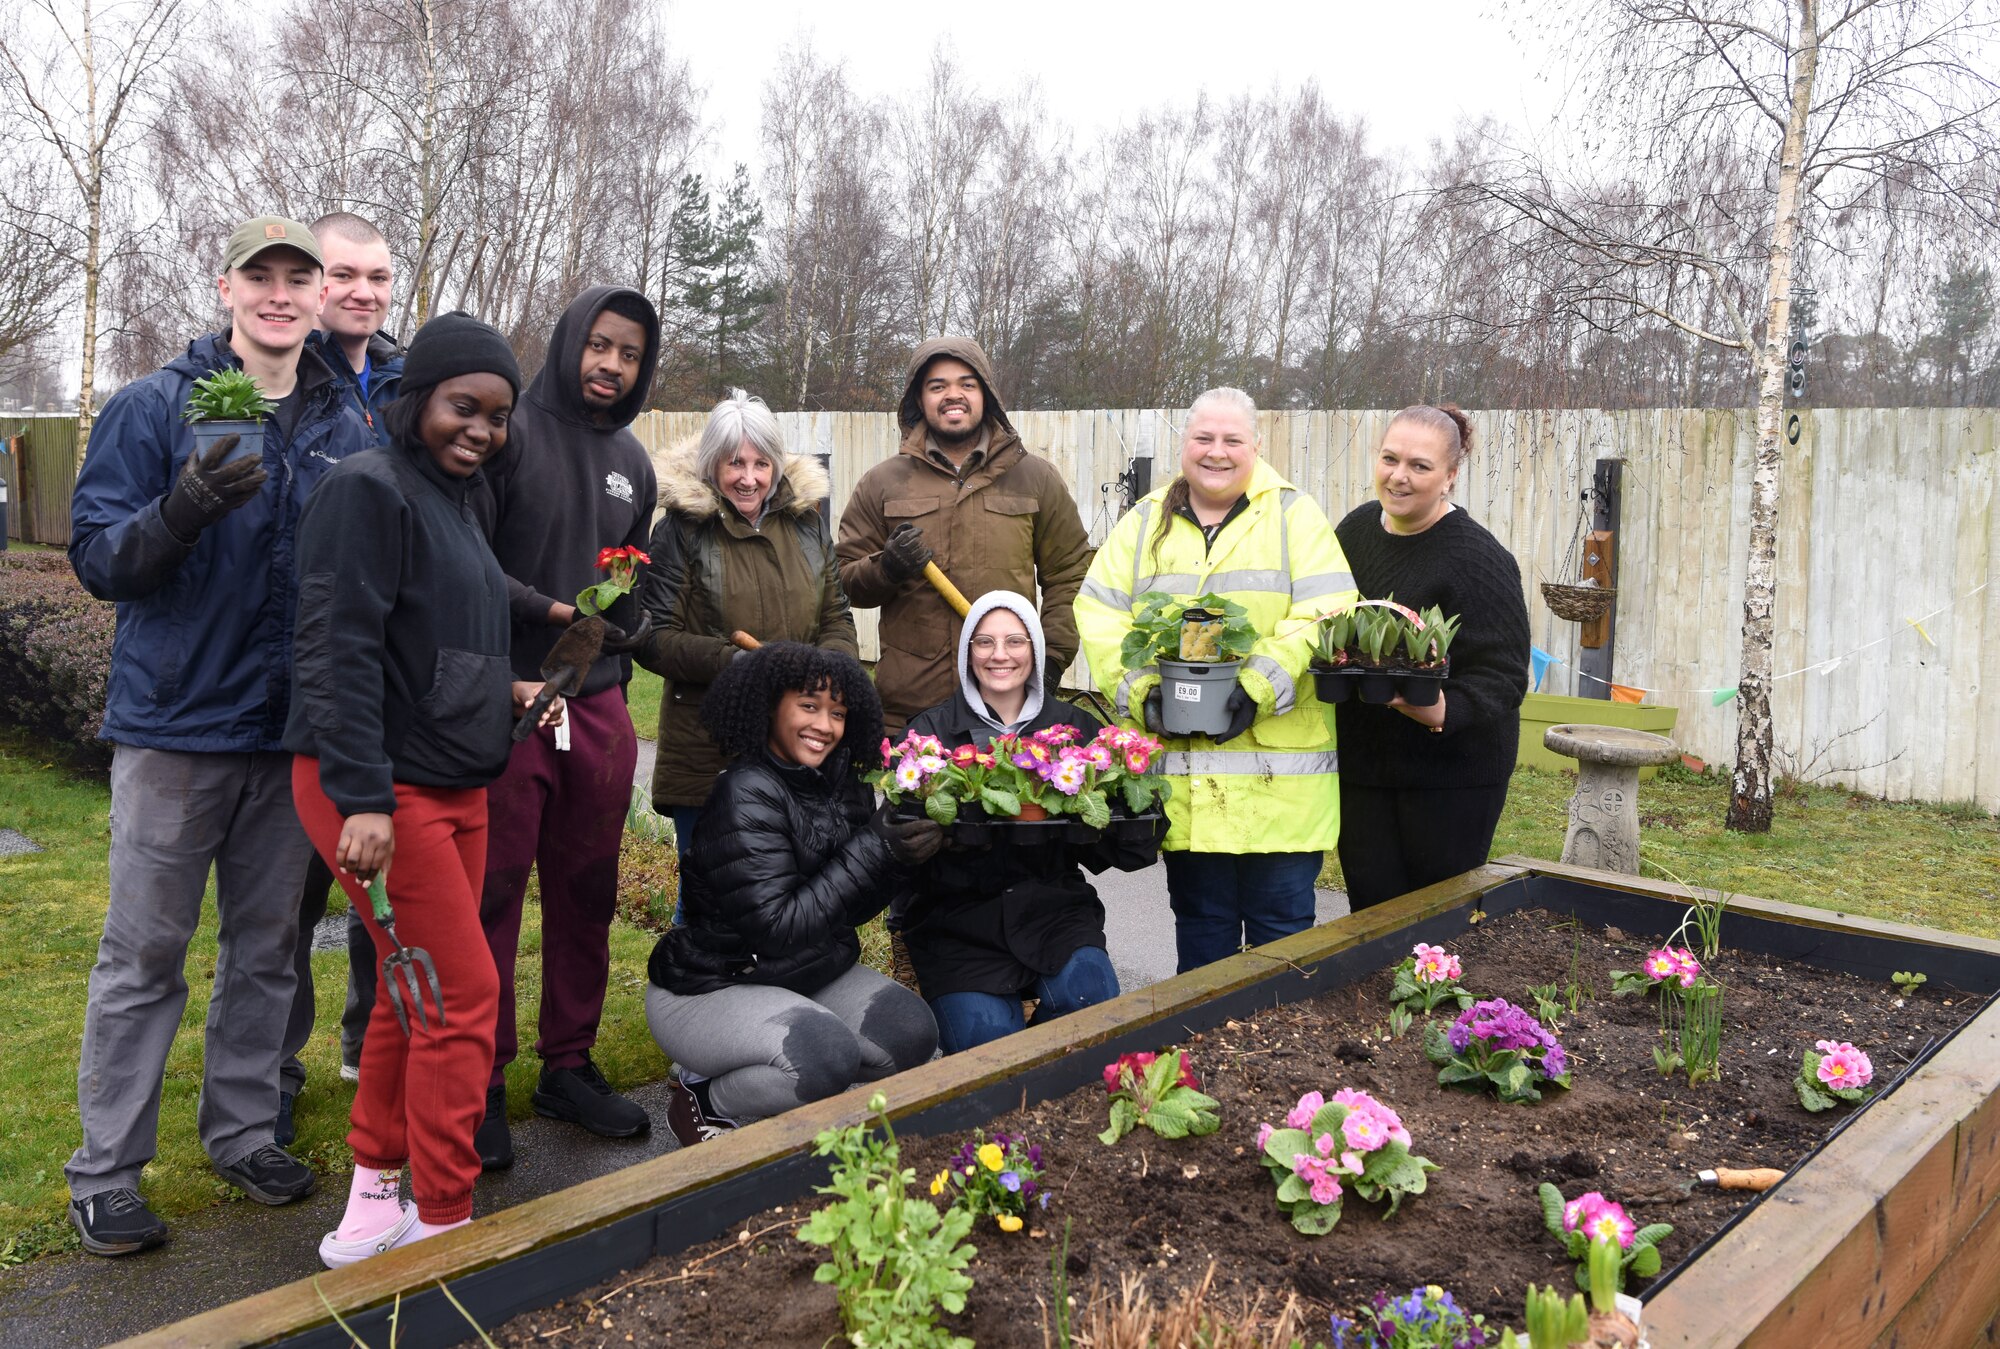 Team Mildenhall Airmen, along with Mildenhall Lodge Care Home staff, show off some of the spring flowers they planted at the care home garden in Mildenhall, England, March 9, 2023. Despite the bad weather, the Airmen volunteered at the local care home and also tidying the garden and planted spring flowers for the residents to enjoy. (U.S. Air Force photo by Karen Abeyasekere)